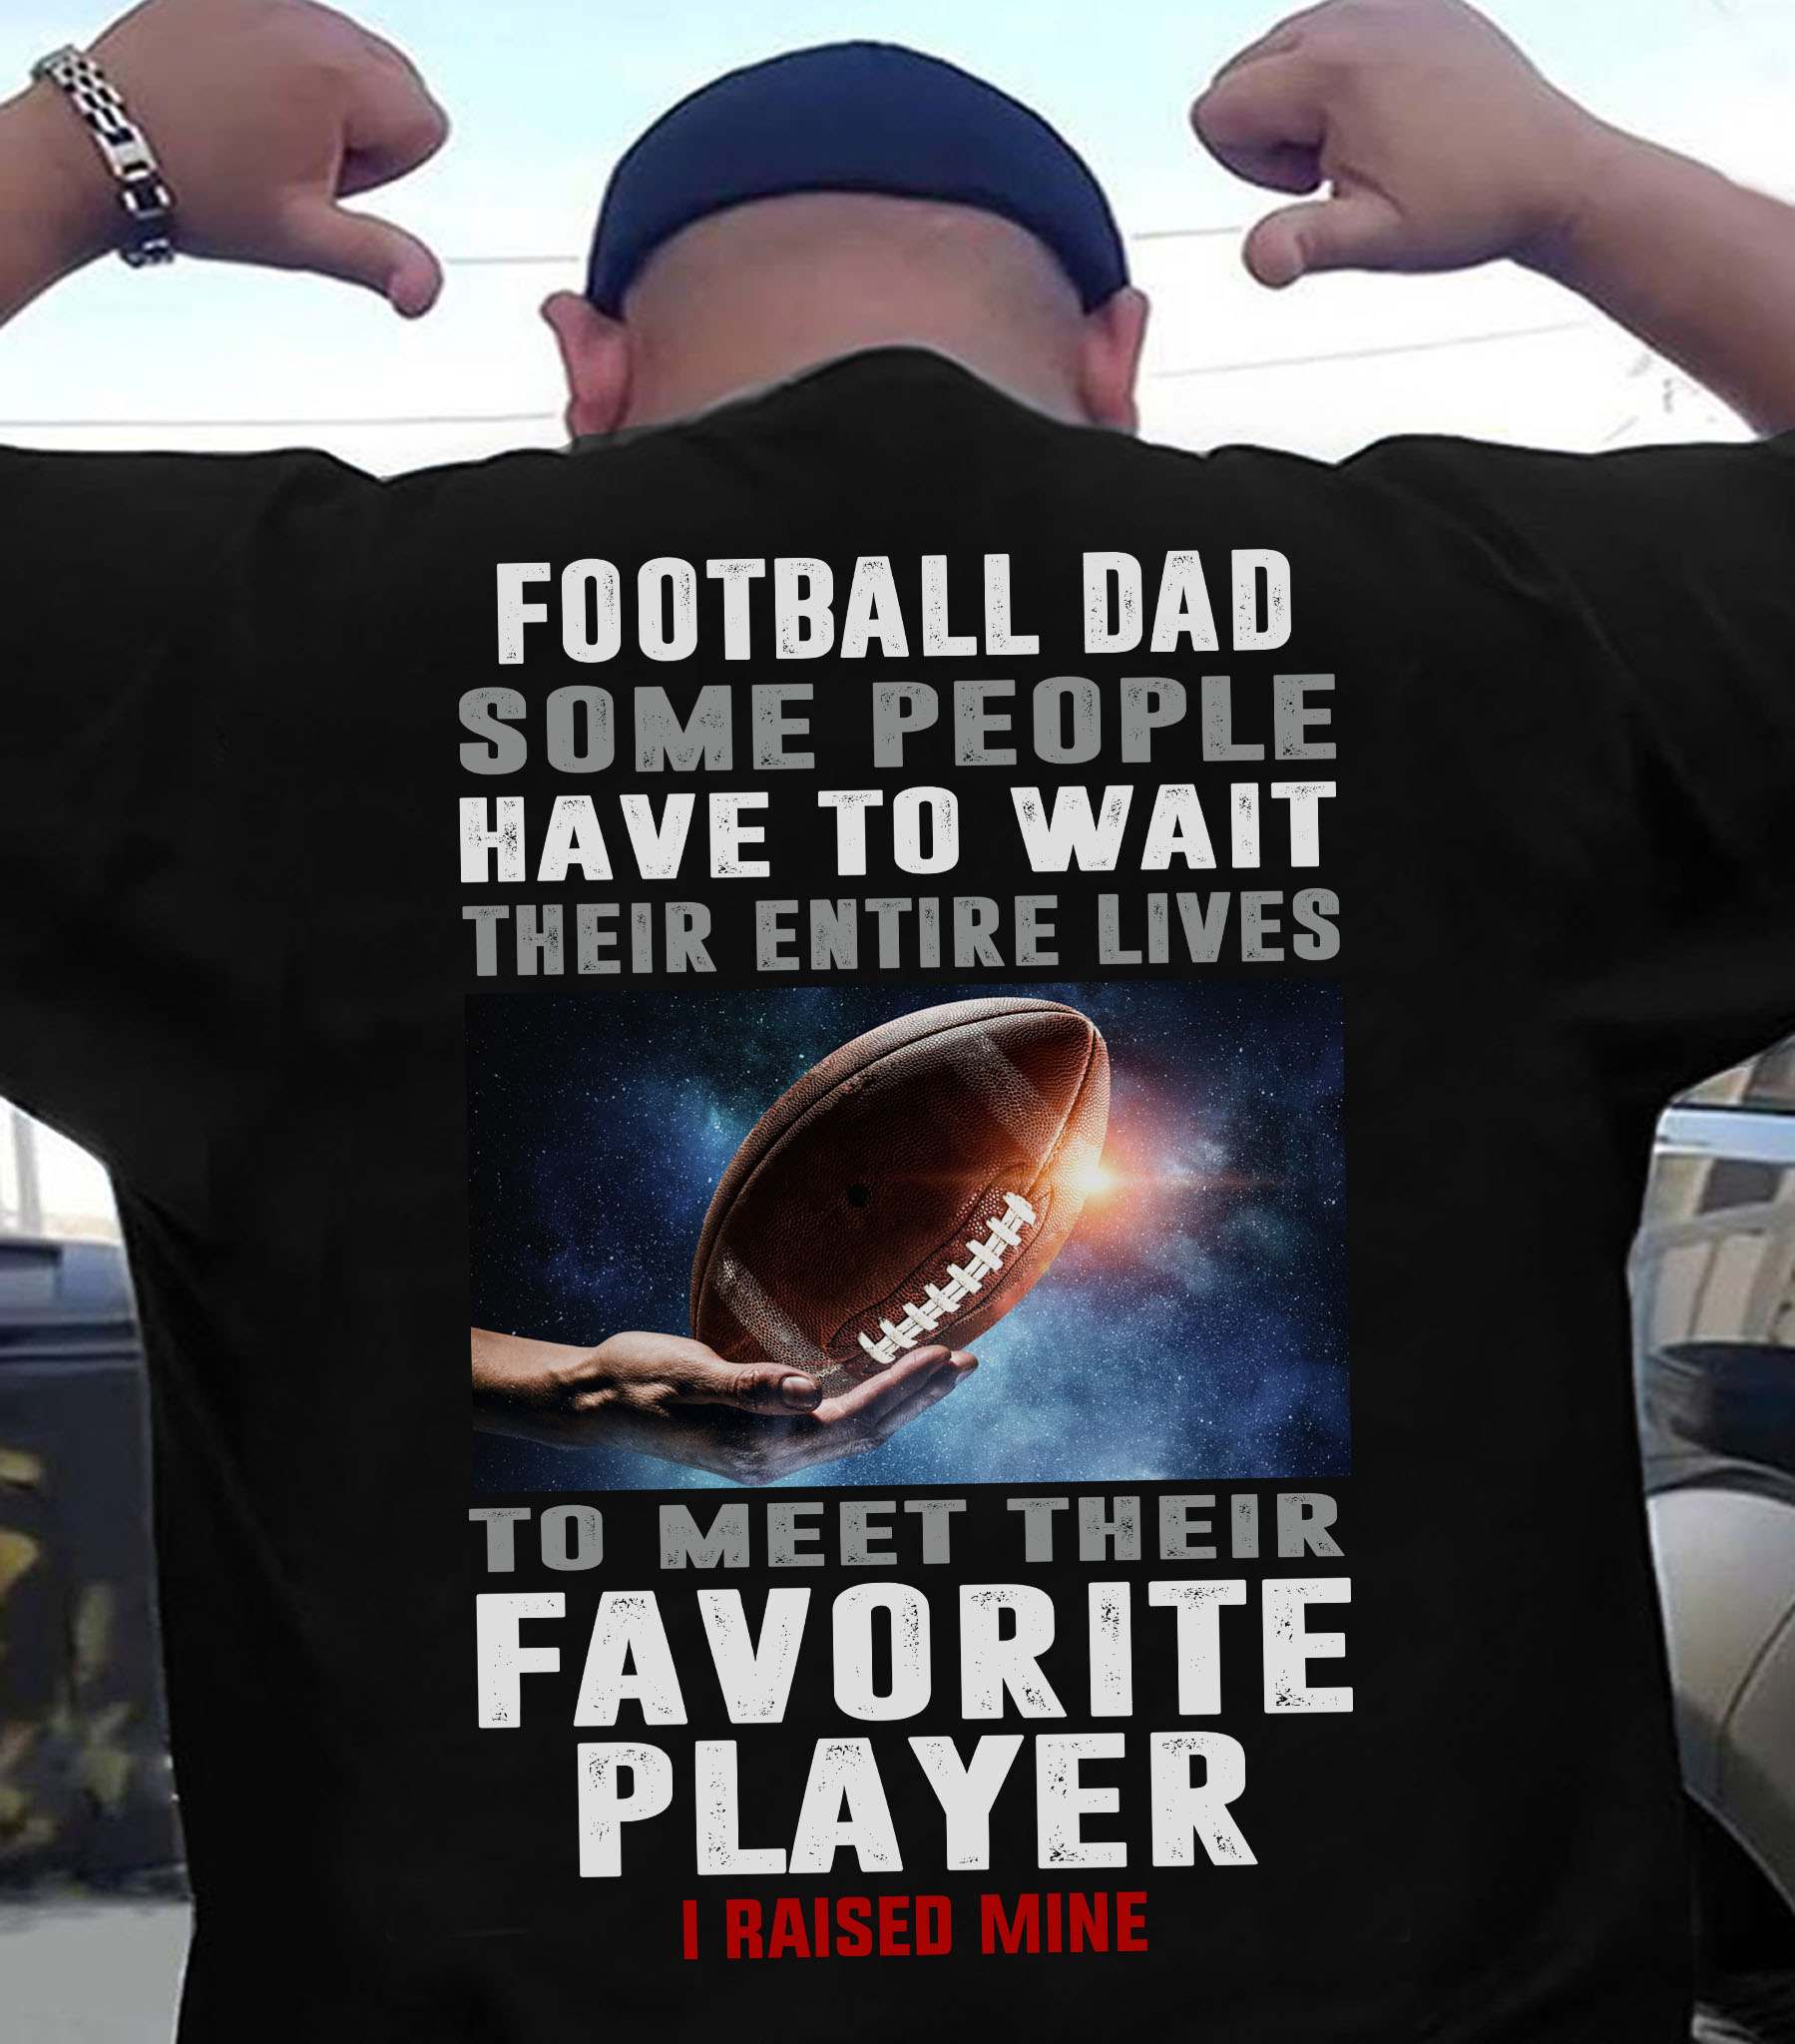 Football Player - Football dad some people have to wait their entire lives to meet their favourite player